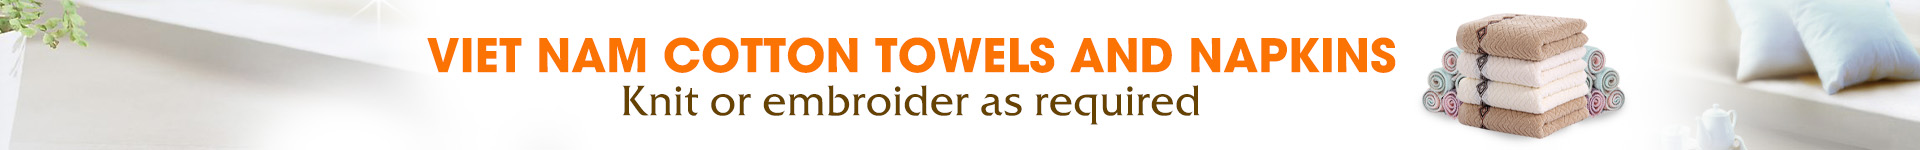 EXPORTED COTTON TOWELS